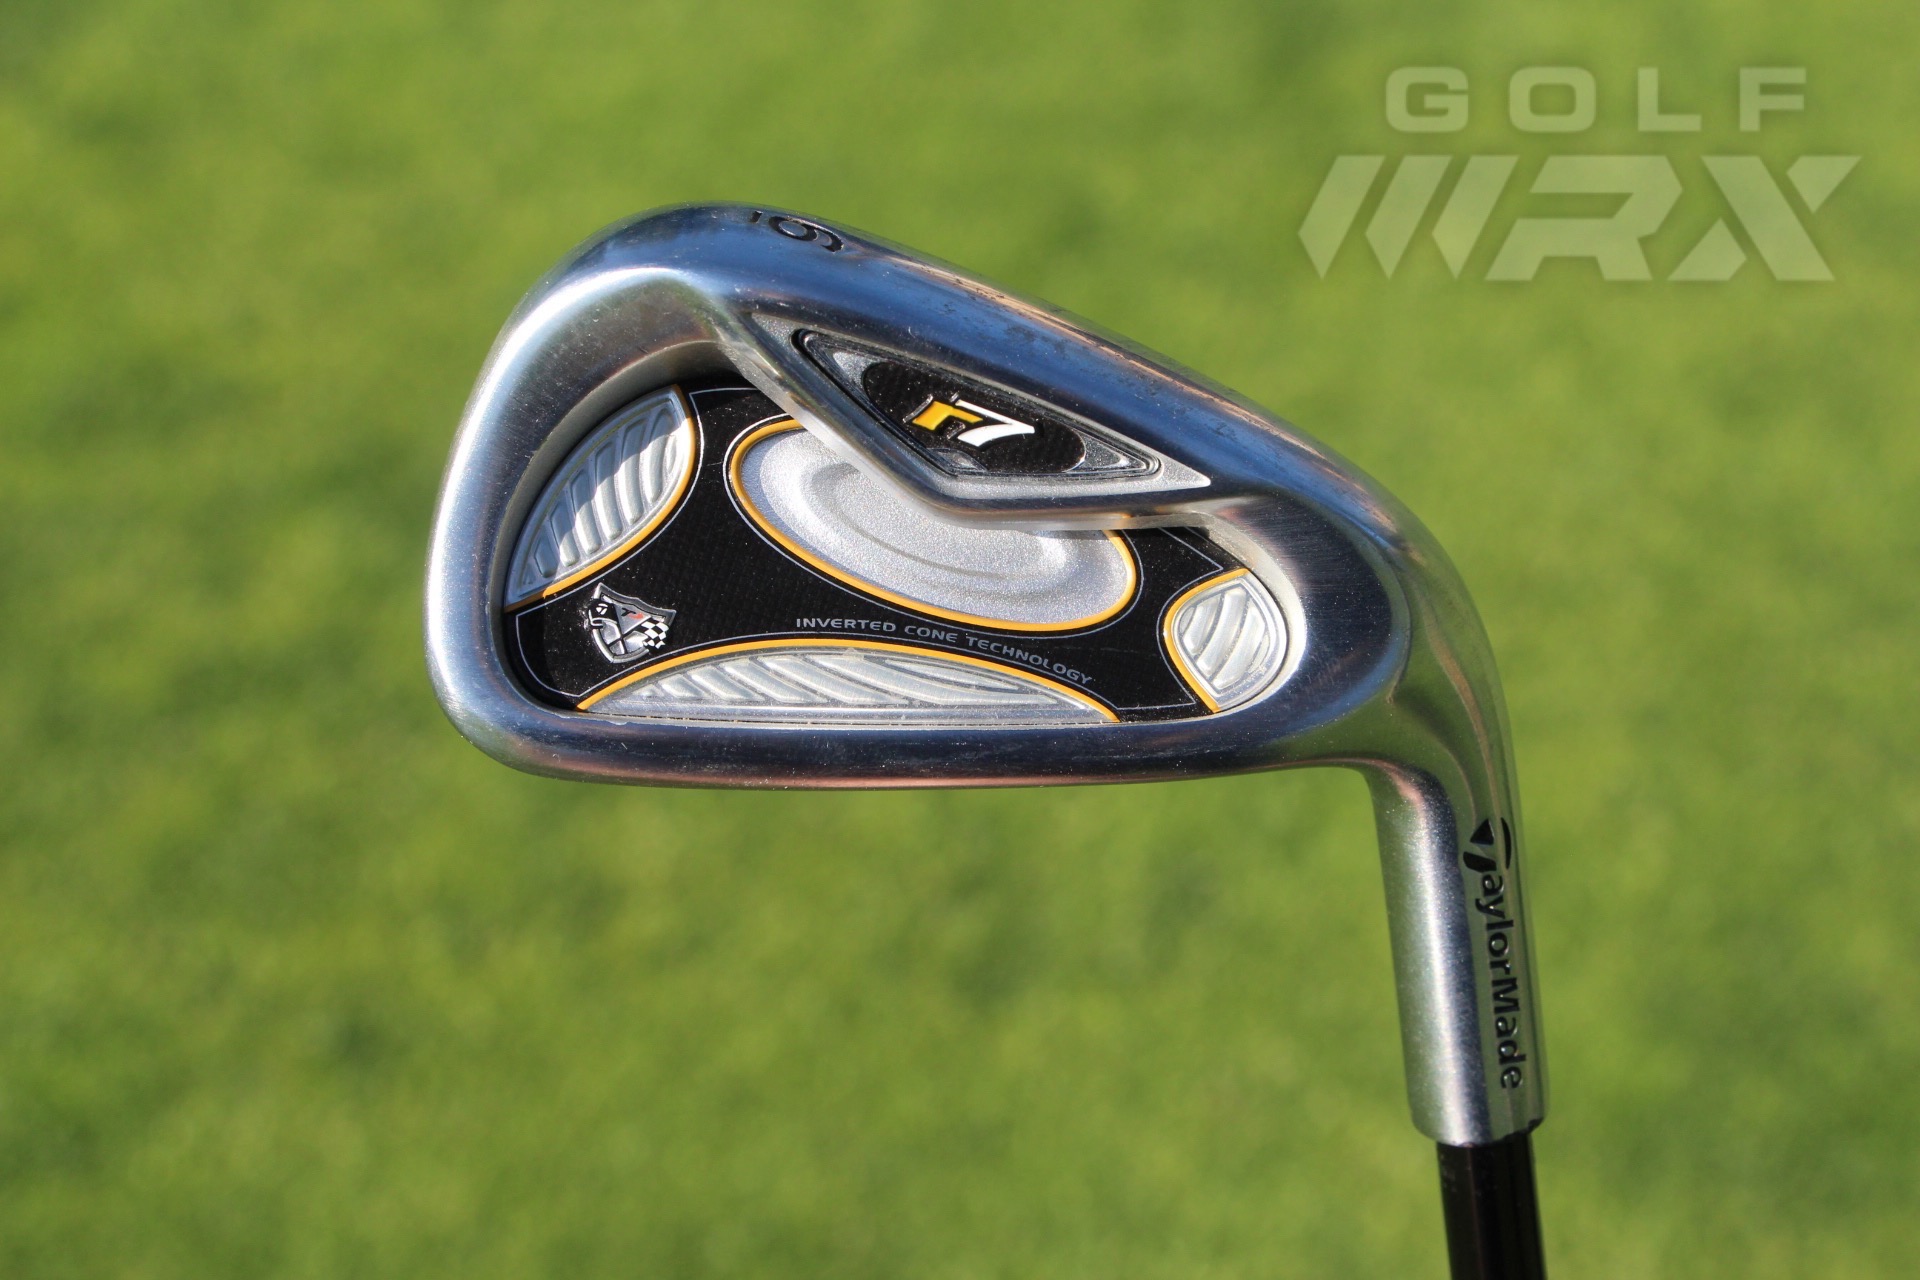 Photos of TaylorMade irons from the last 35 years – GolfWRX